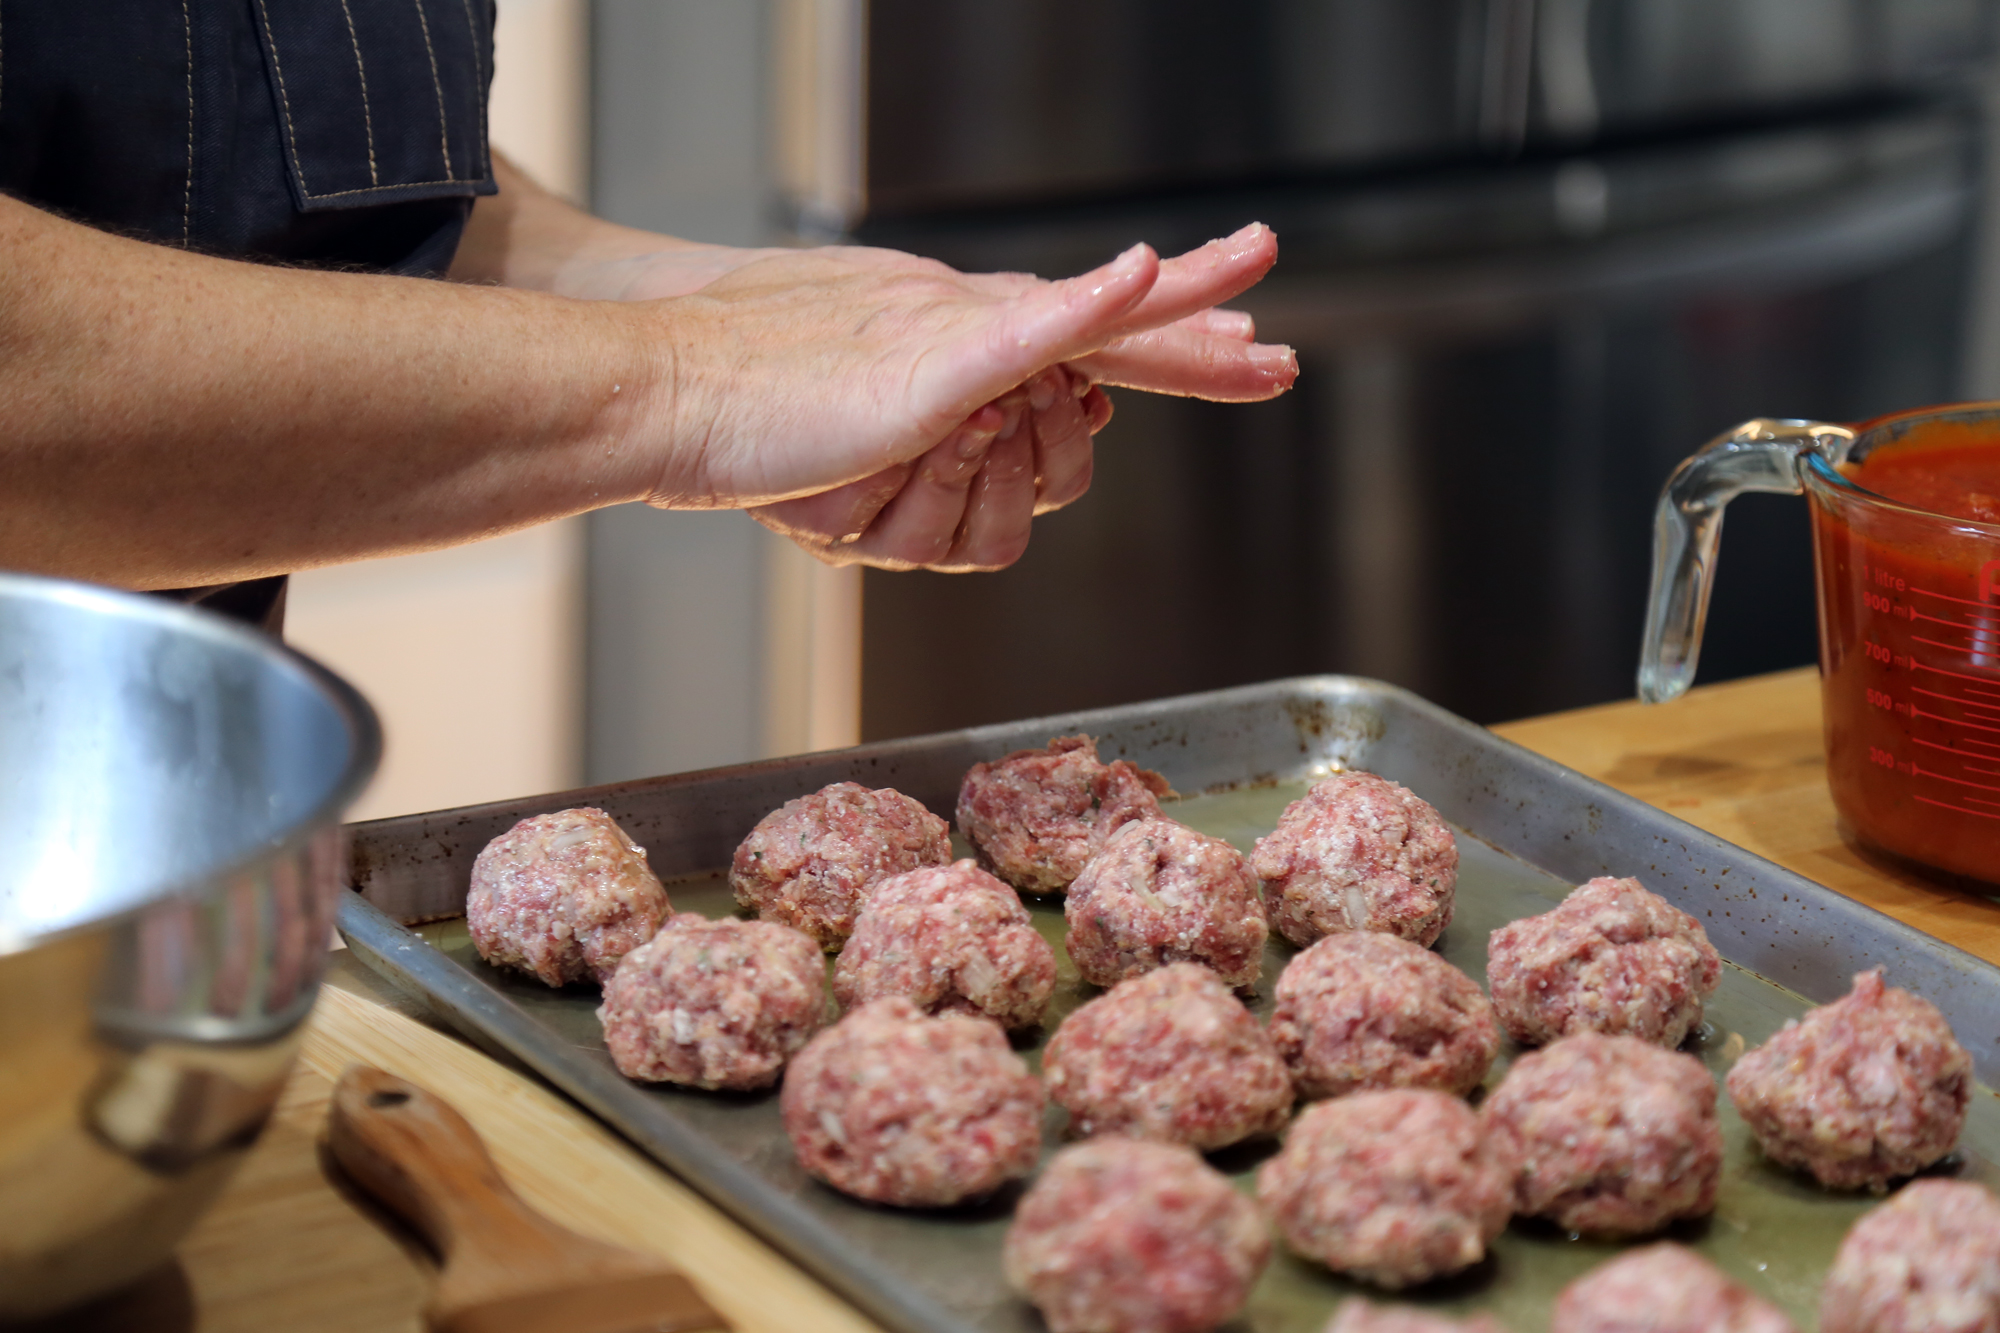 Shape into meatballs, each about 1-inch in diameter; you should end up with about 20 meatballs. Transfer the meatballs to the baking sheet.